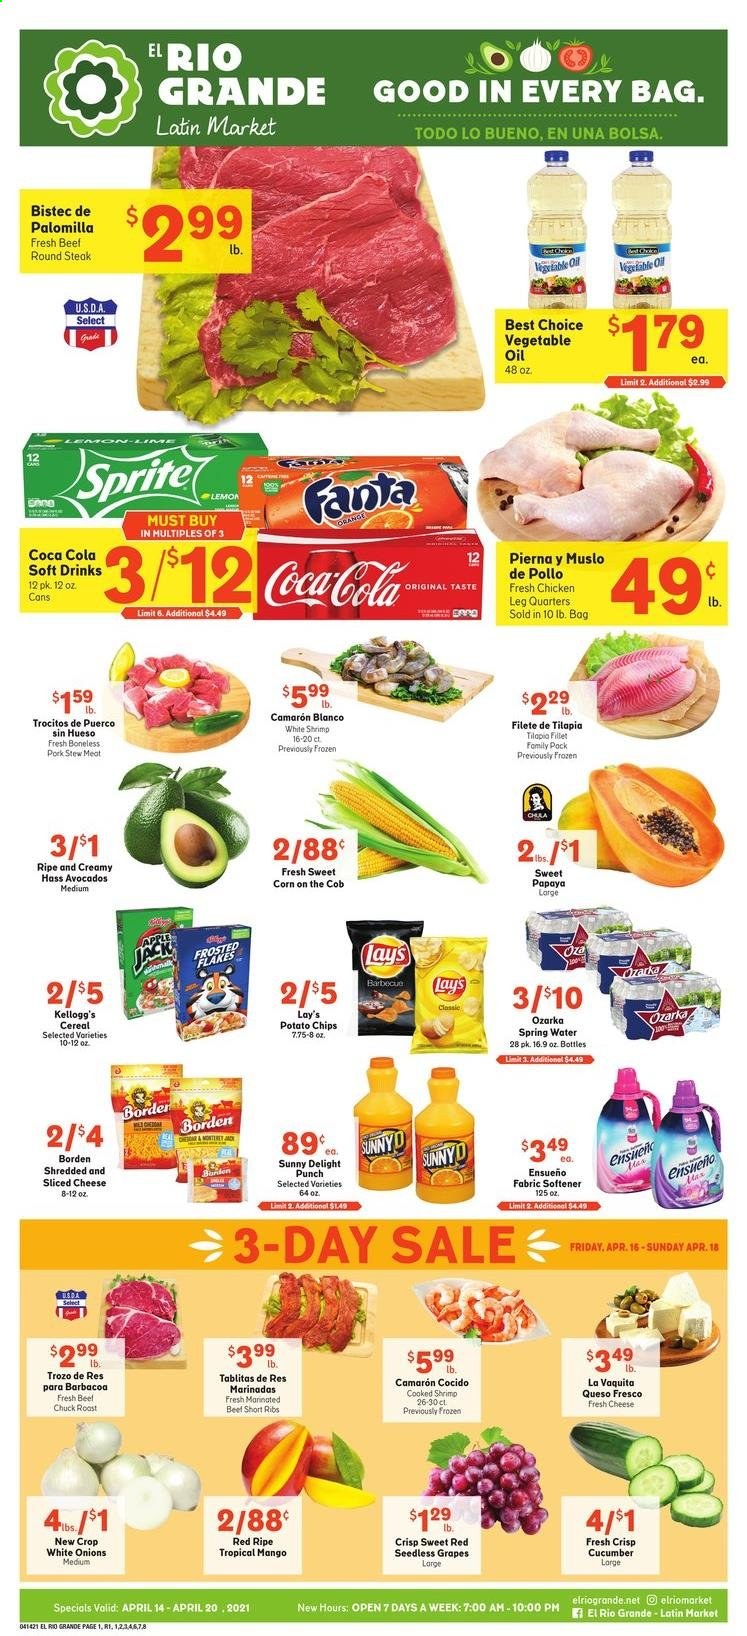 thumbnail - El Rio Grande Flyer - 04/14/2021 - 04/20/2021 - Sales products - stew meat, seedless grapes, corn, onion, sweet corn, avocado, grapes, mango, papaya, tilapia, shrimps, sliced cheese, queso fresco, cheese, Kellogg's, potato chips, Lay’s, cereals, vegetable oil, Coca-Cola, Sprite, Fanta, soft drink, spring water, punch, chicken legs, beef meat, beef ribs, steak, round steak, chuck roast, marinated beef. Page 1.